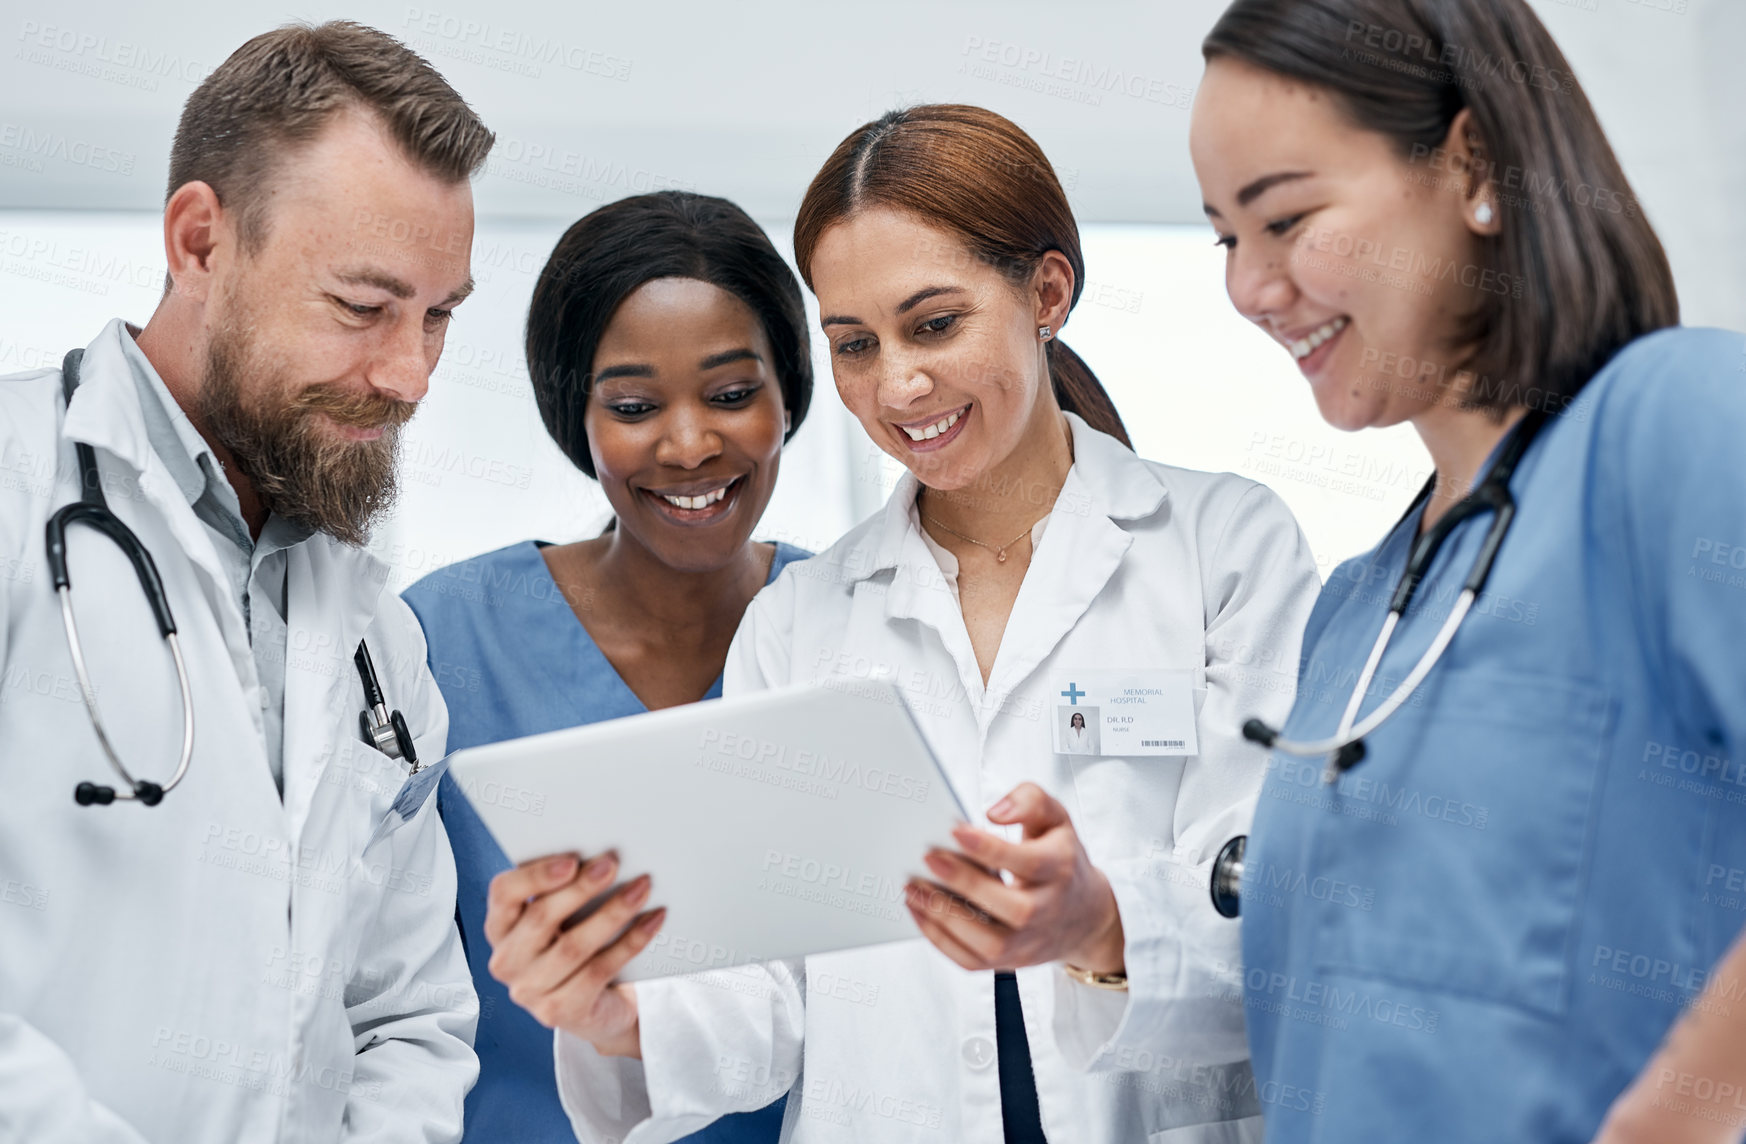 Buy stock photo Shot of a group of medical practitioners using a digital tablet together in a hospital